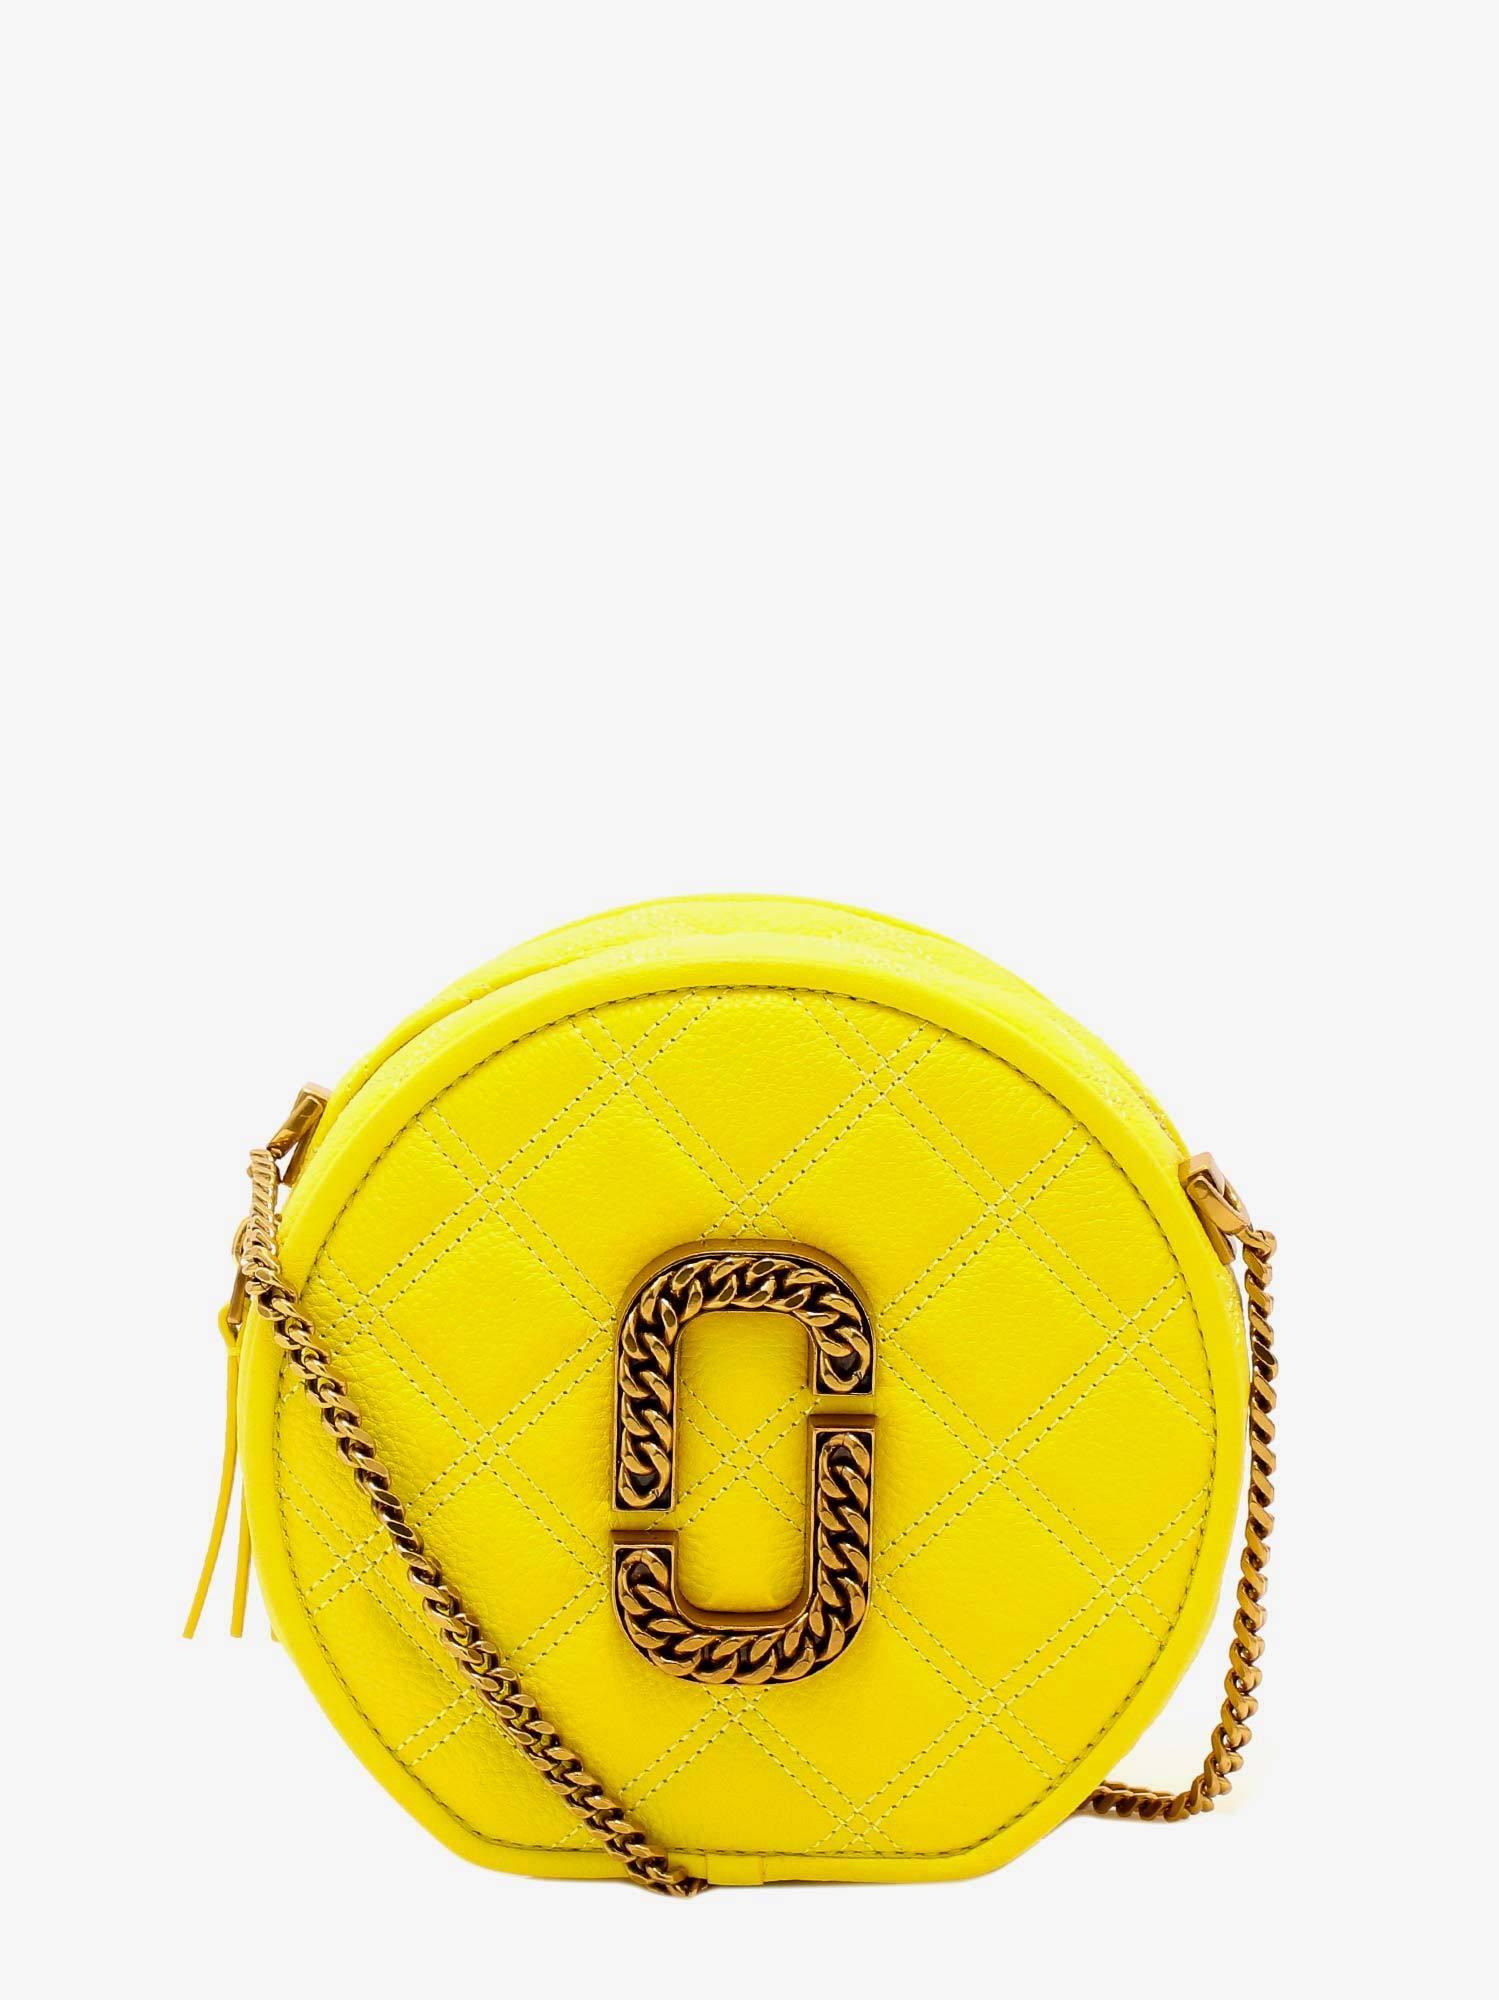 Marc Jacobs Leather The Status Round Crossbody Bag in Yellow - Lyst